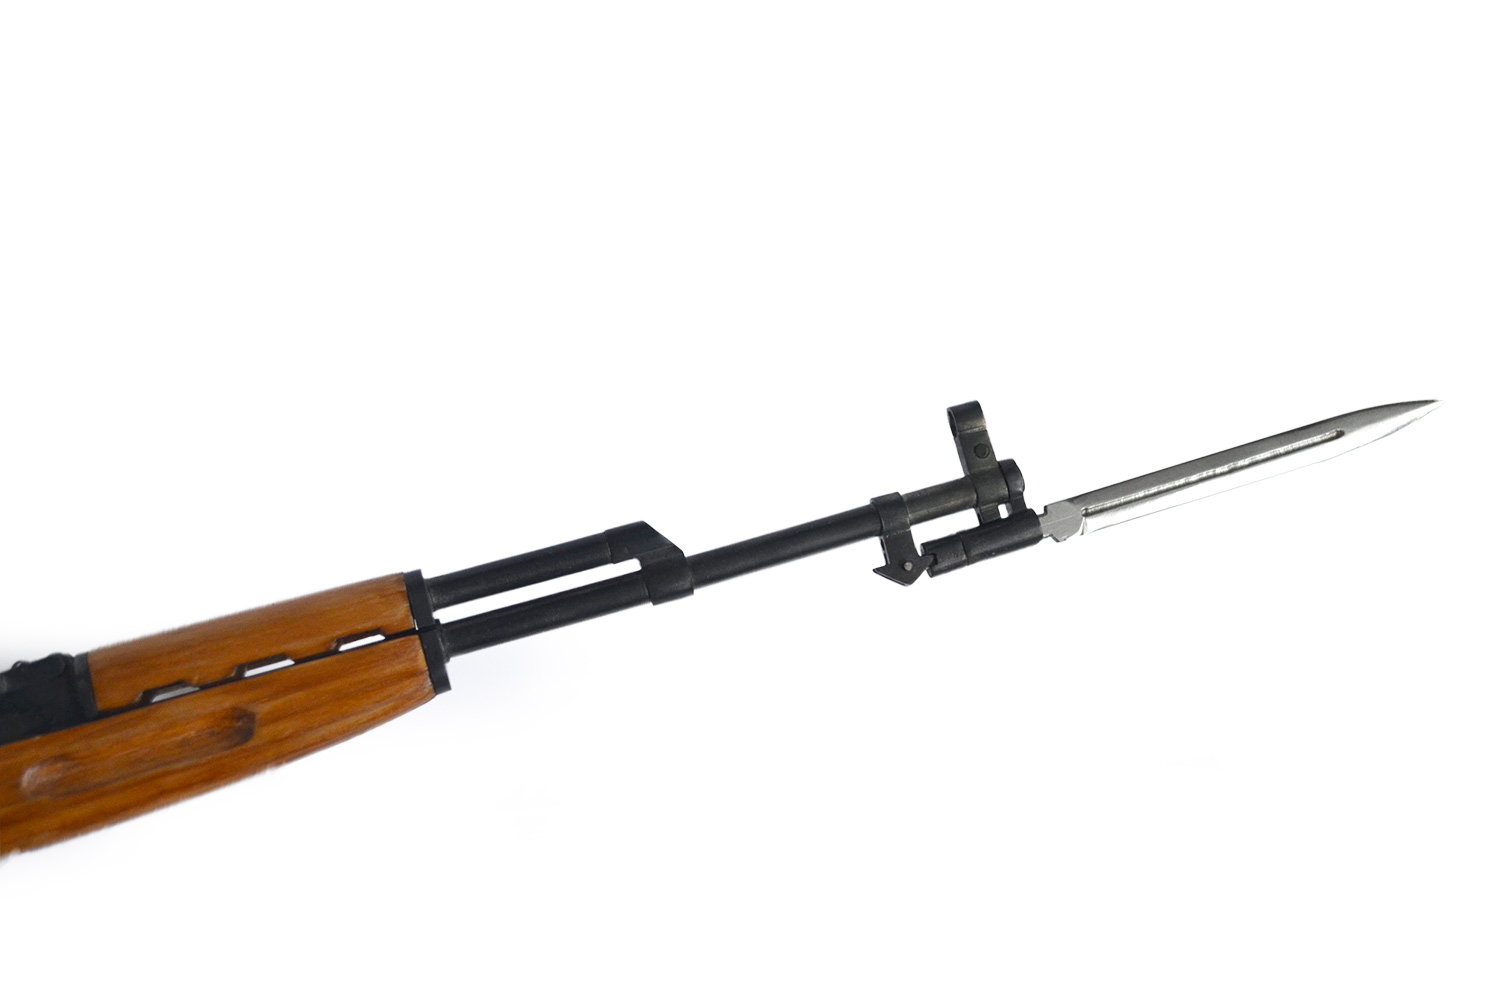 SKS rifle scale 1:3 ����������� 2